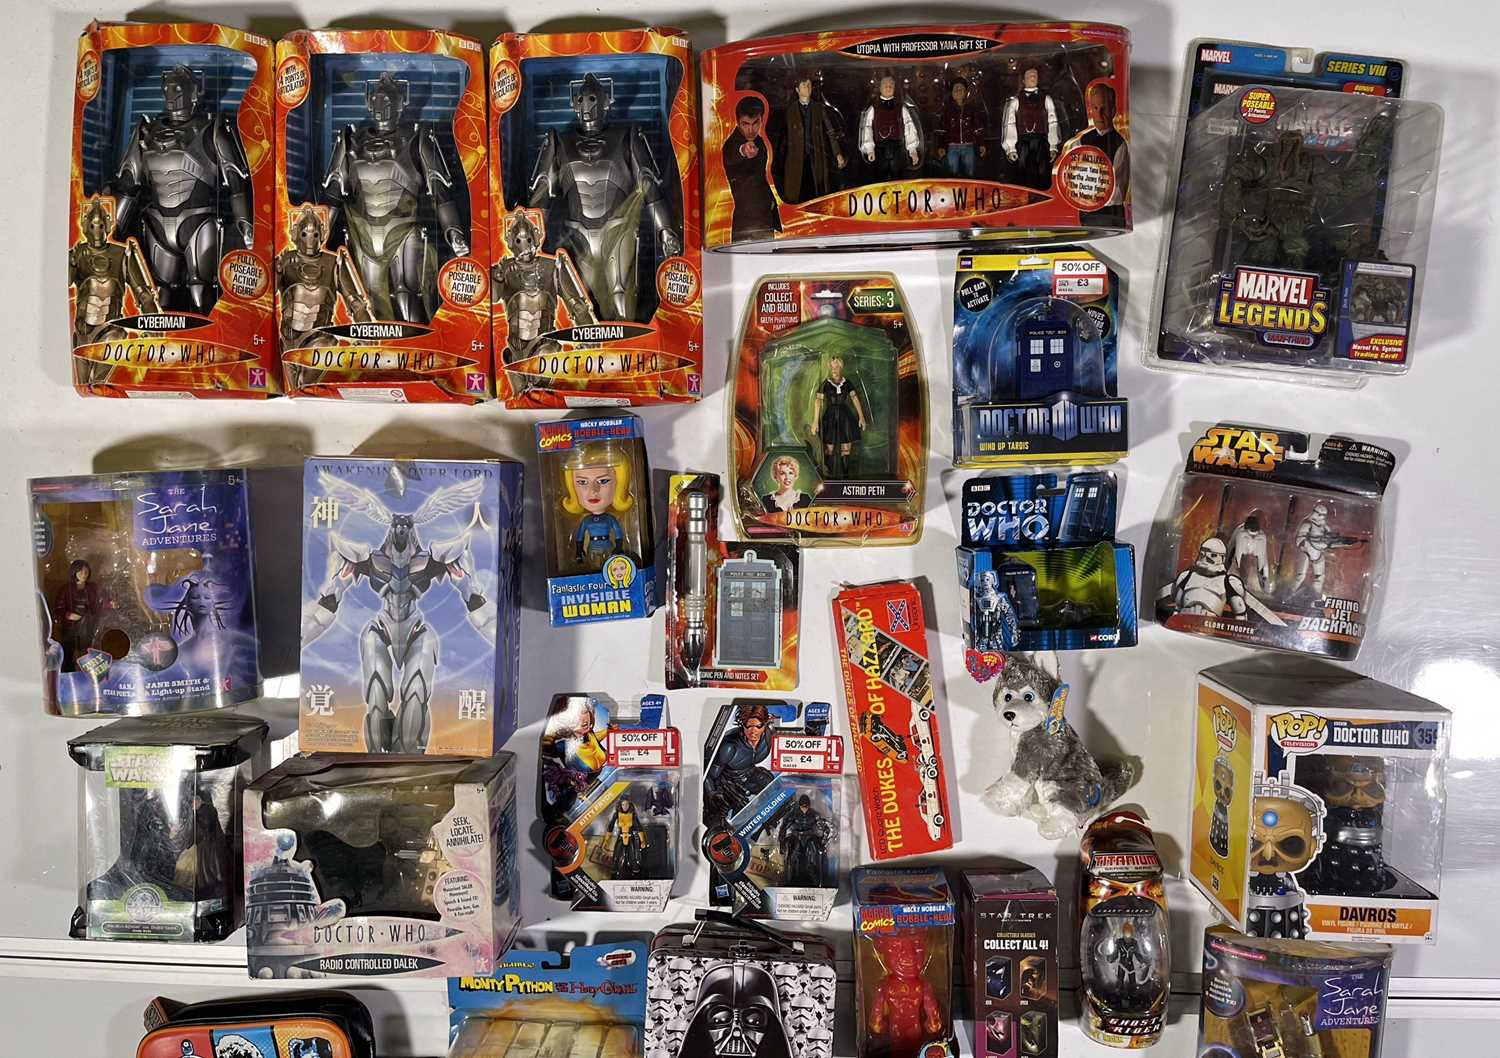 TOYS & FIGURINES (STAR WARS, DOCTOR WHO, MARVEL). - Image 3 of 3